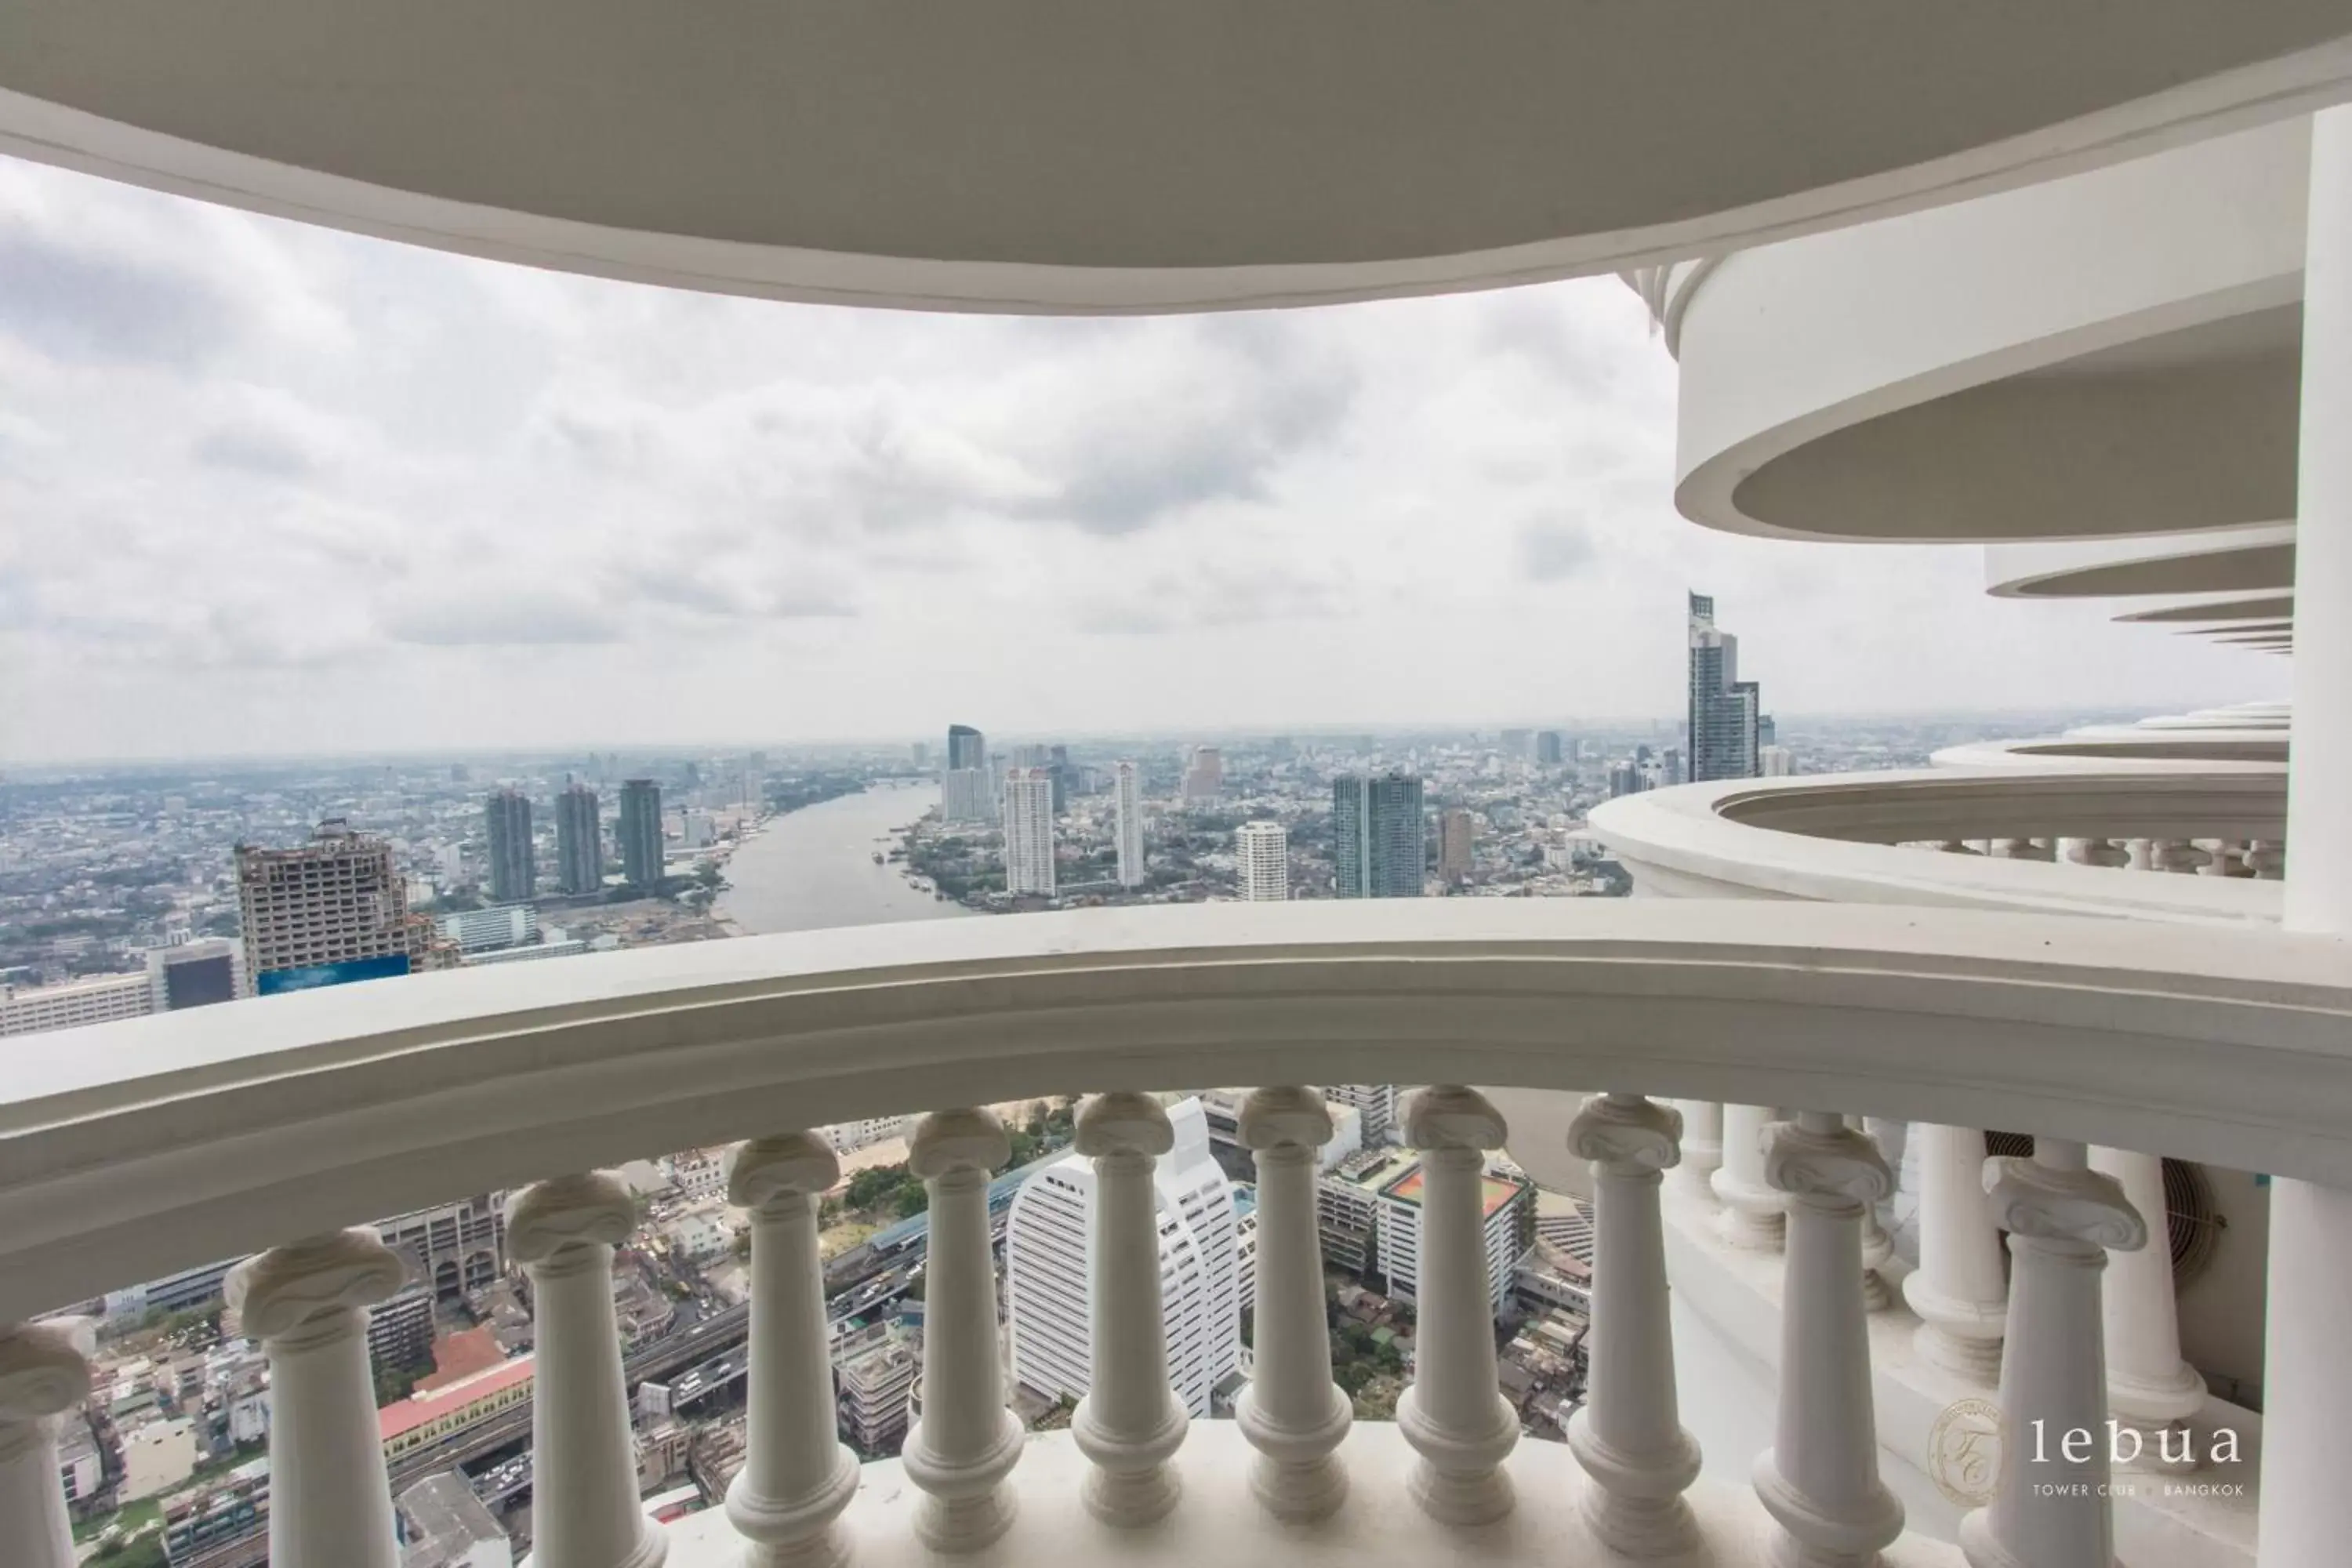 Balcony/Terrace in lebua at State Tower